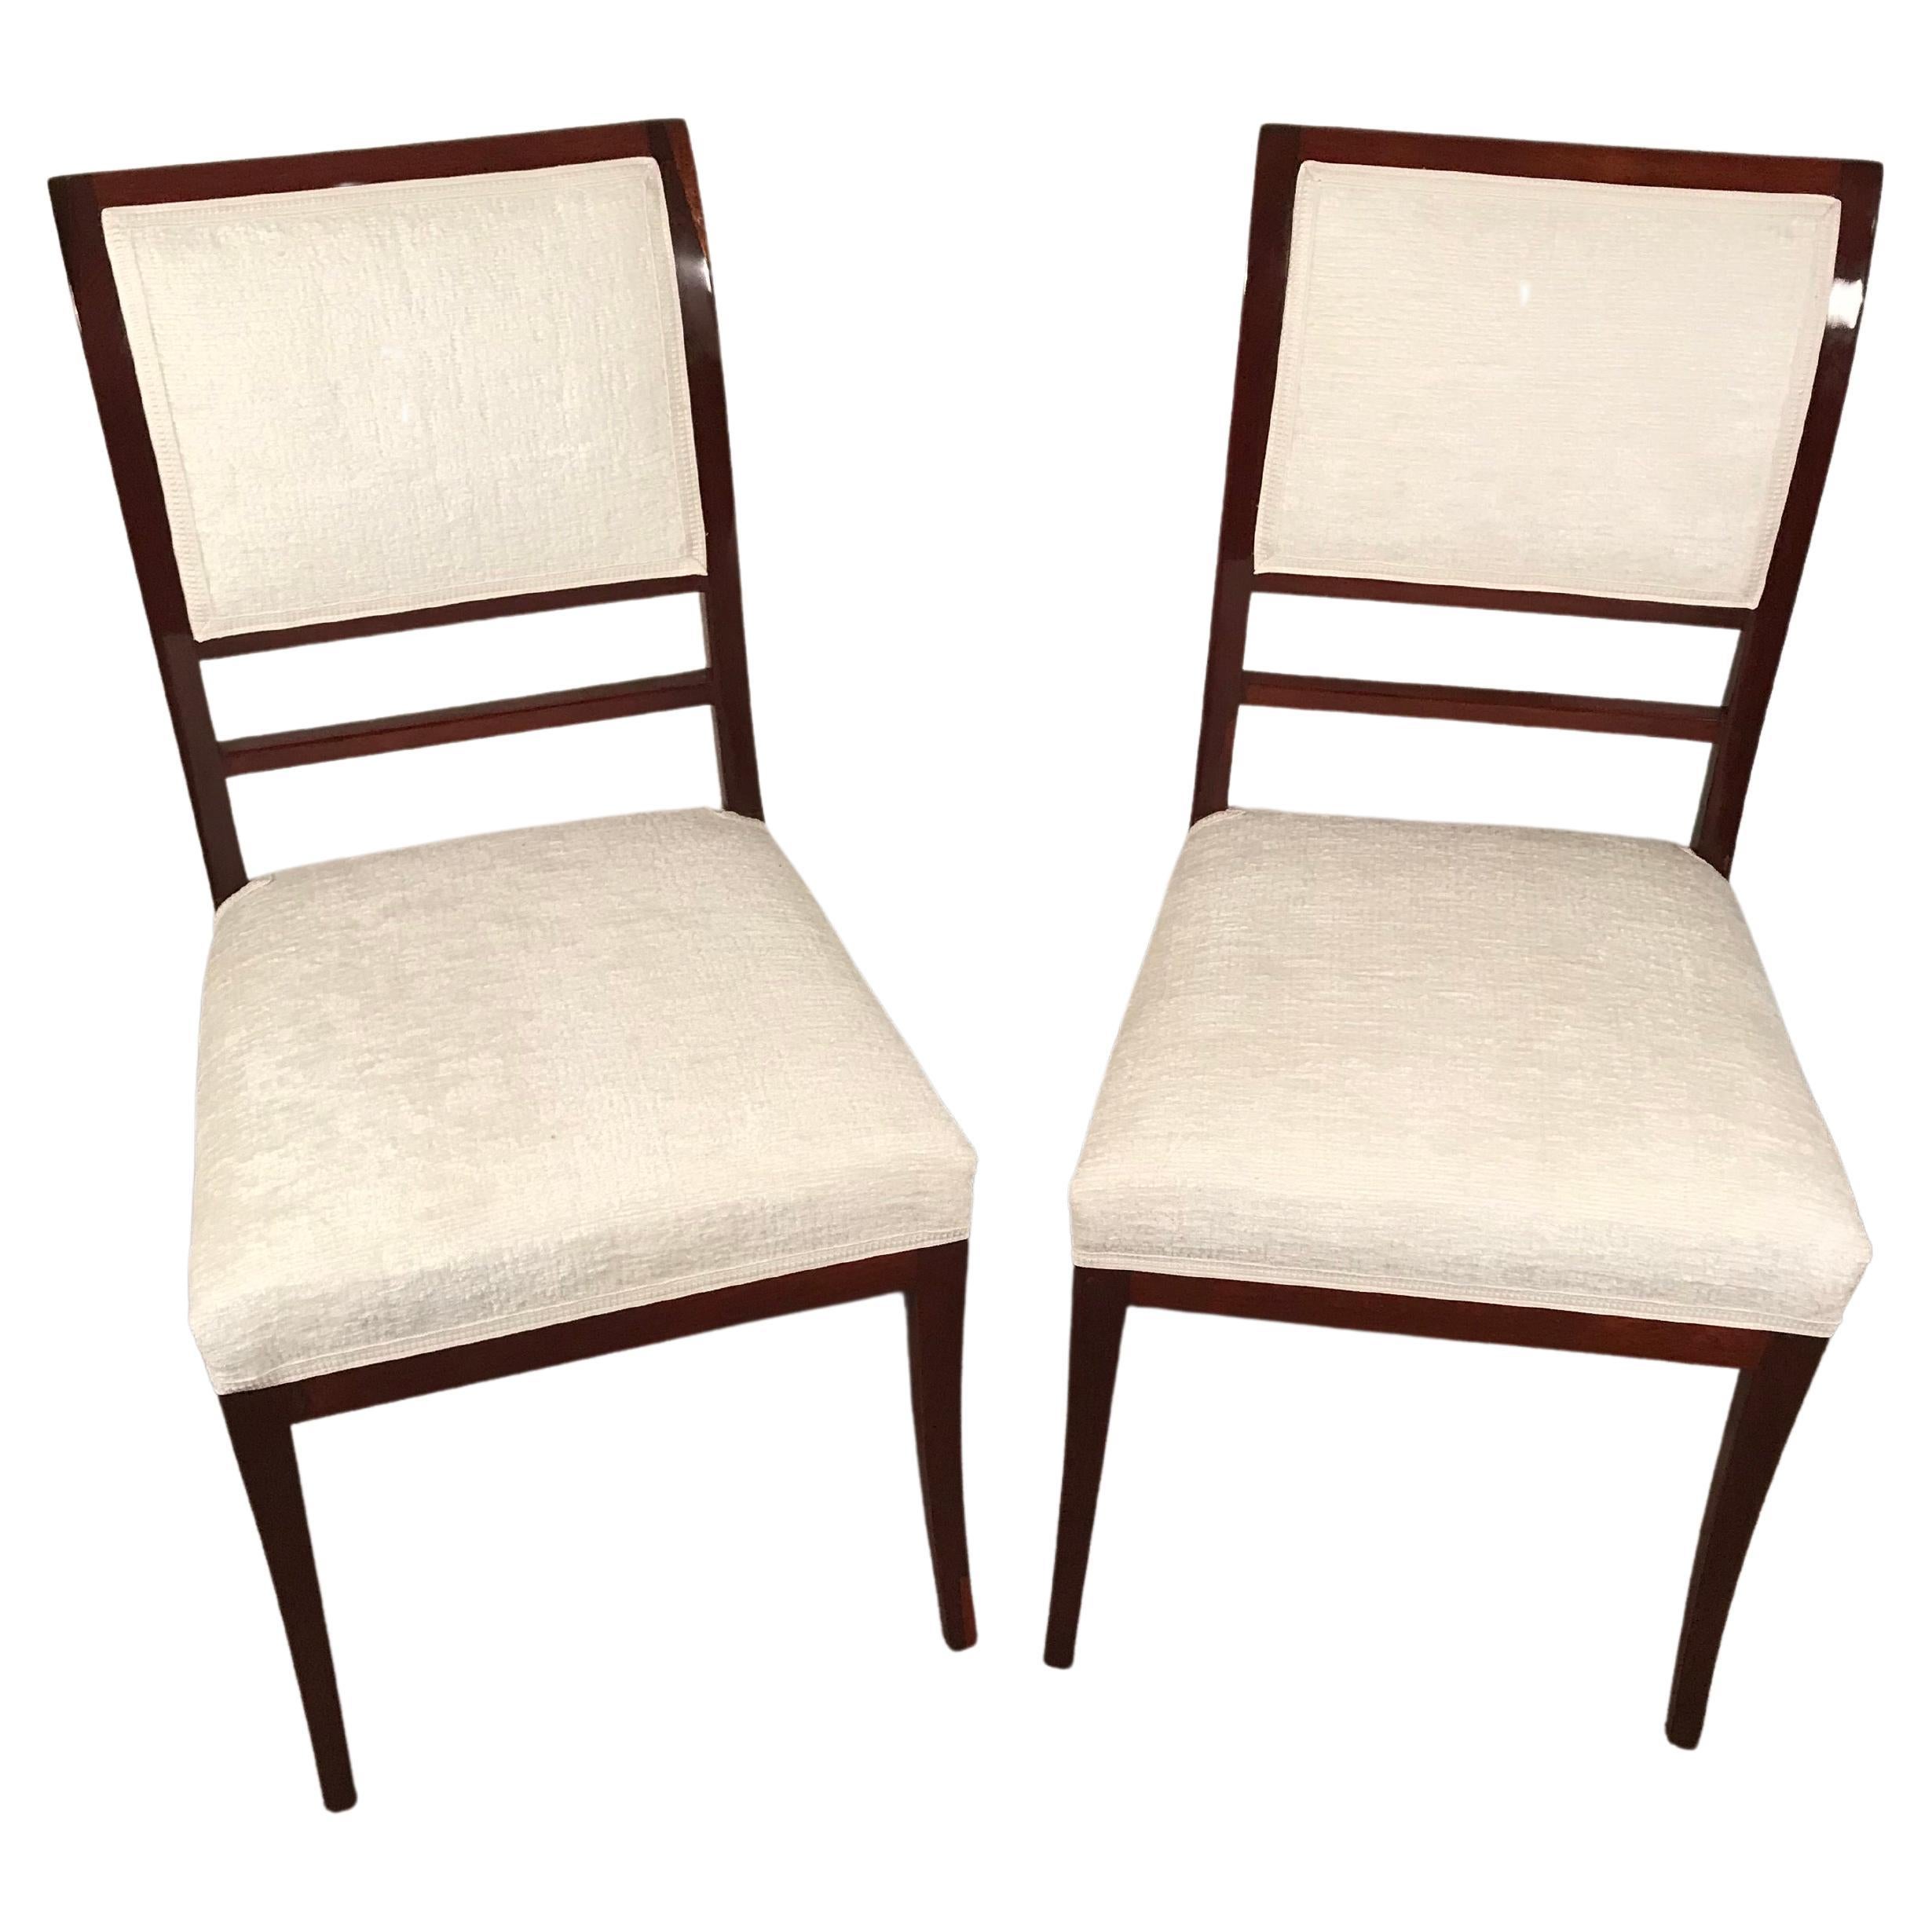 Pair of French Antique Chairs, 1830